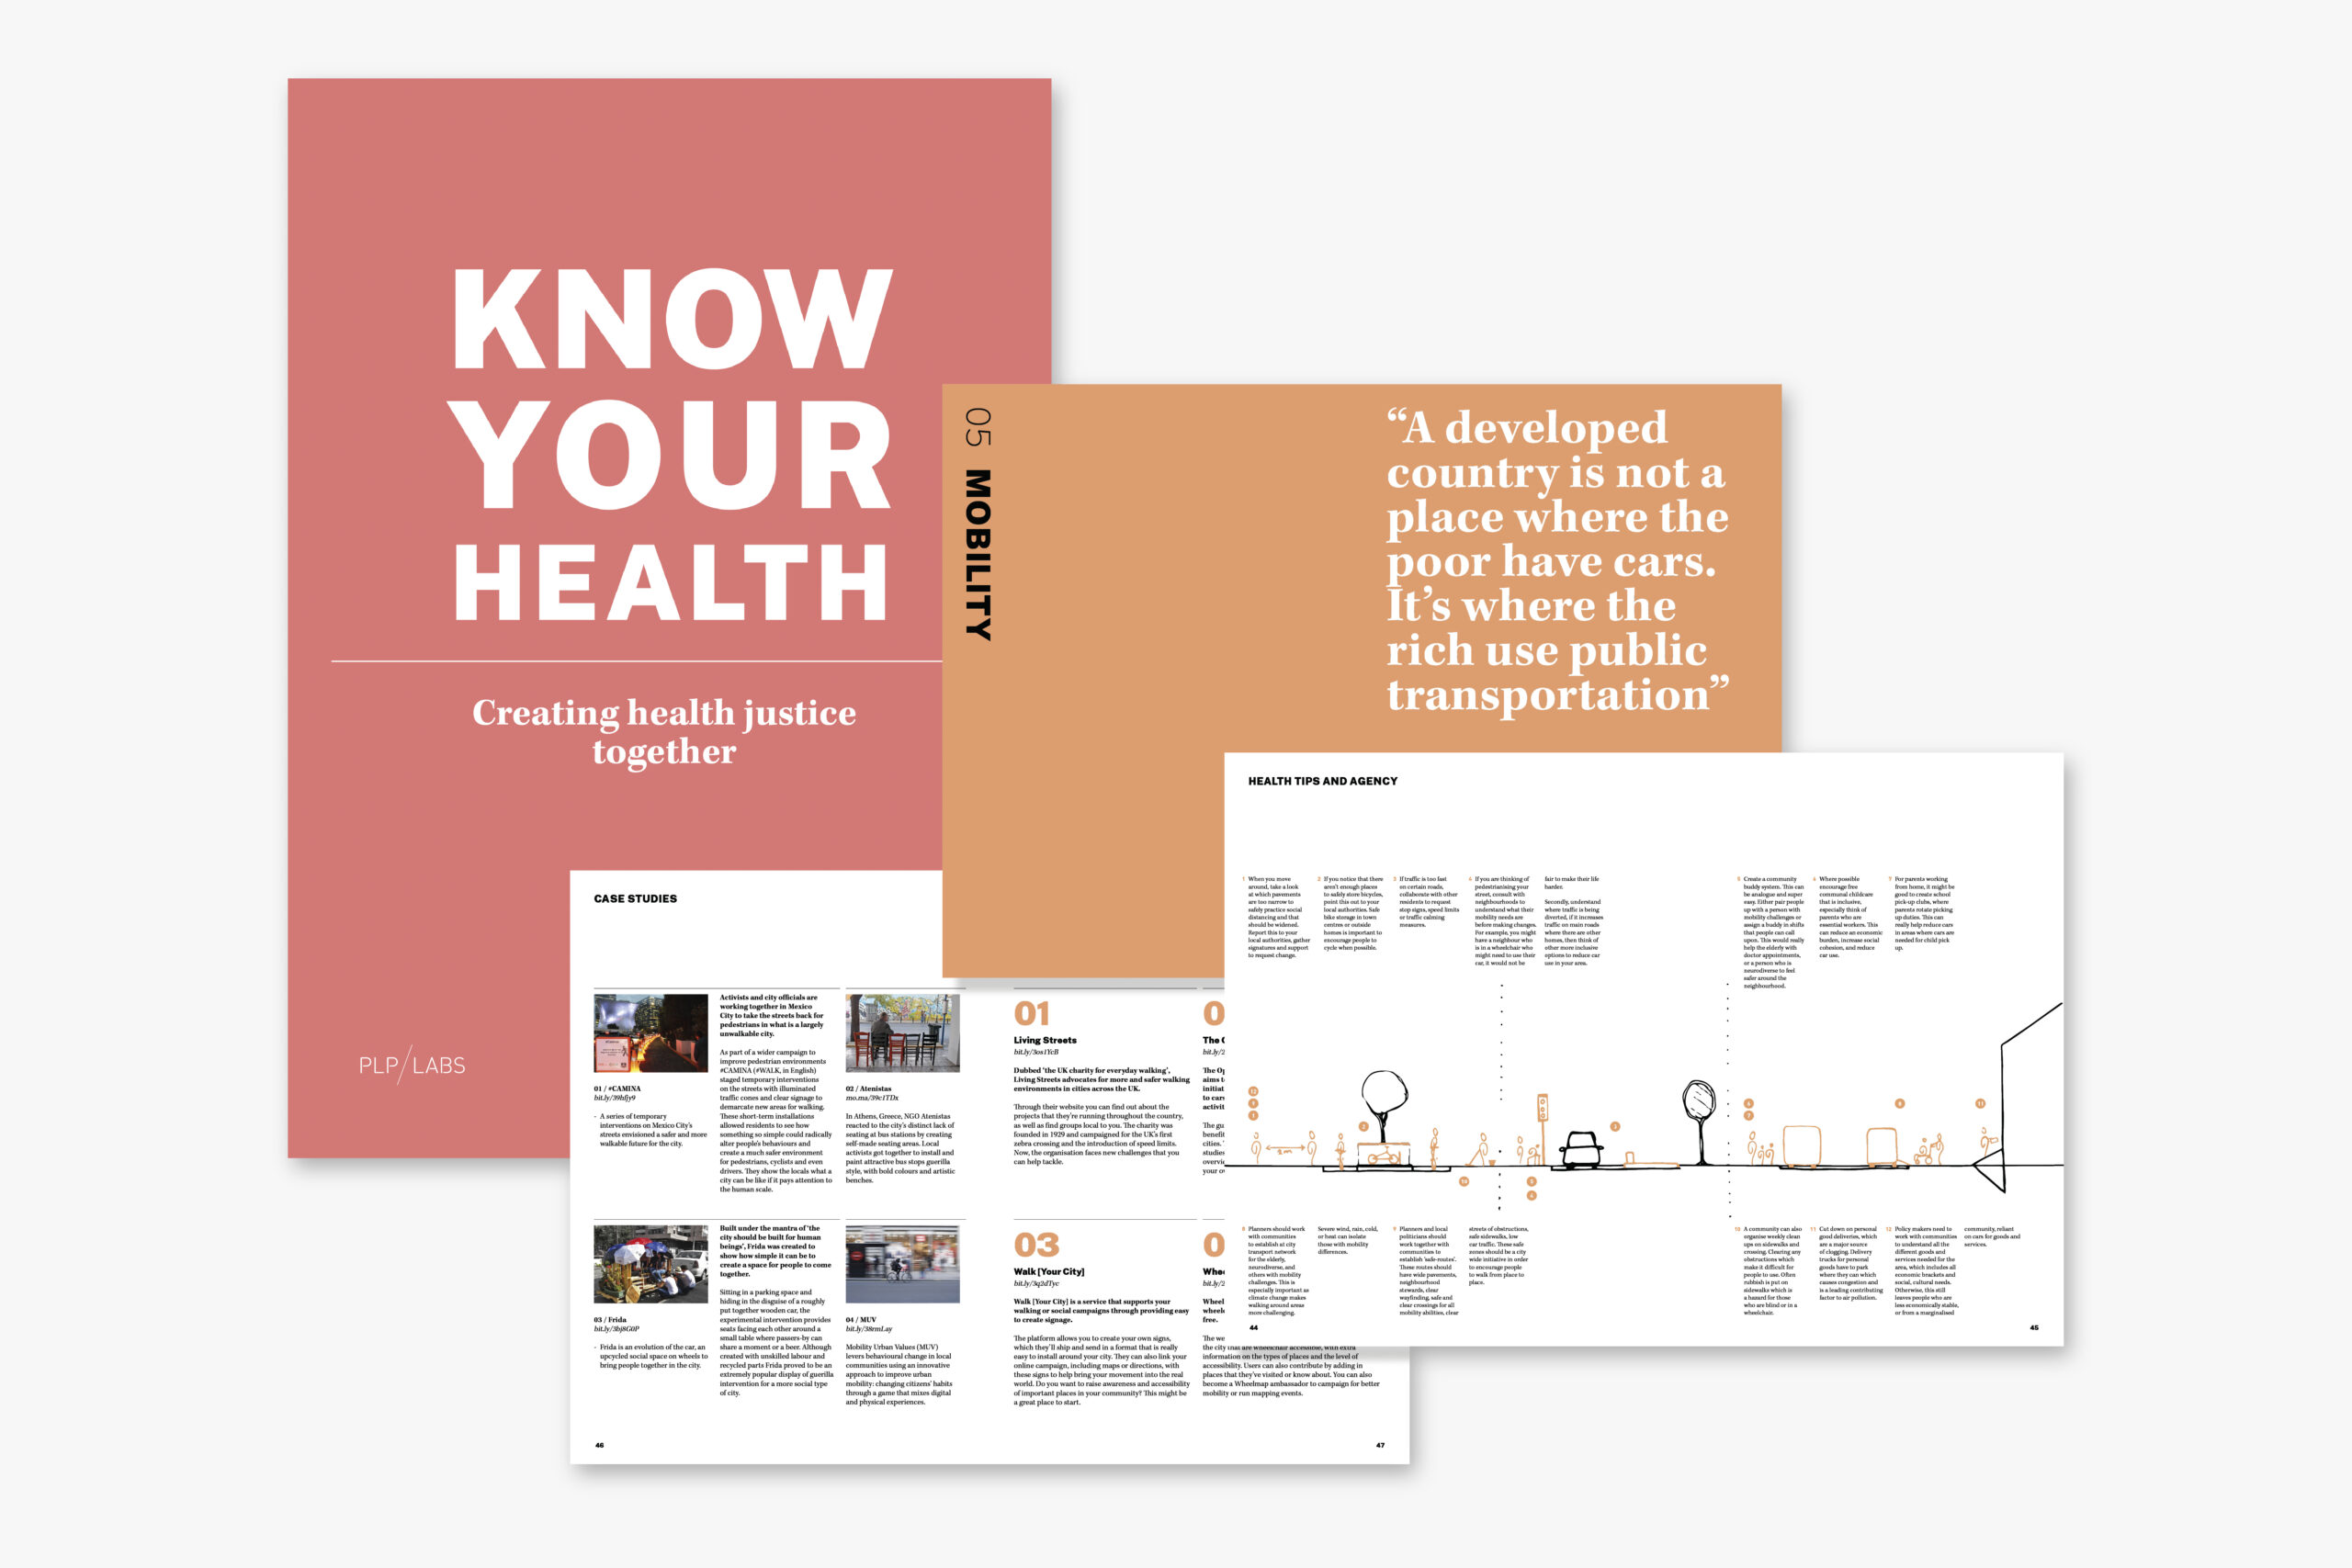 Know Your Health  - an online tool created with Centric Lab and Comuzi to help people in cities create long-term health resilience as individuals and as a community